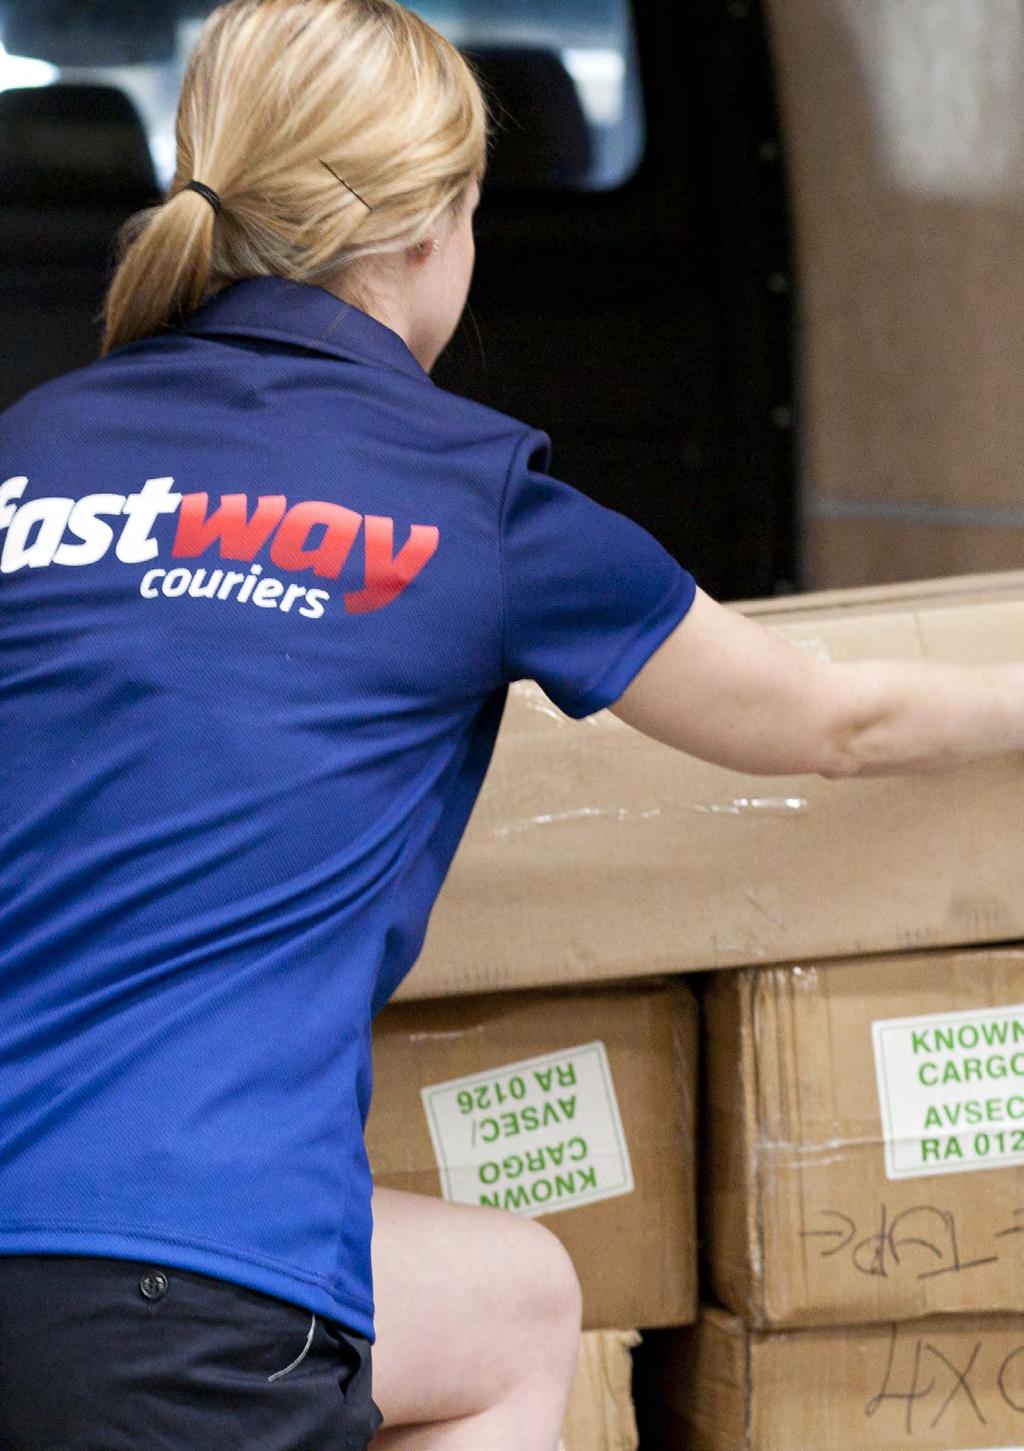 Marketing Saturation marketing is the proven formula for building a successful courier franchise at Fastway.